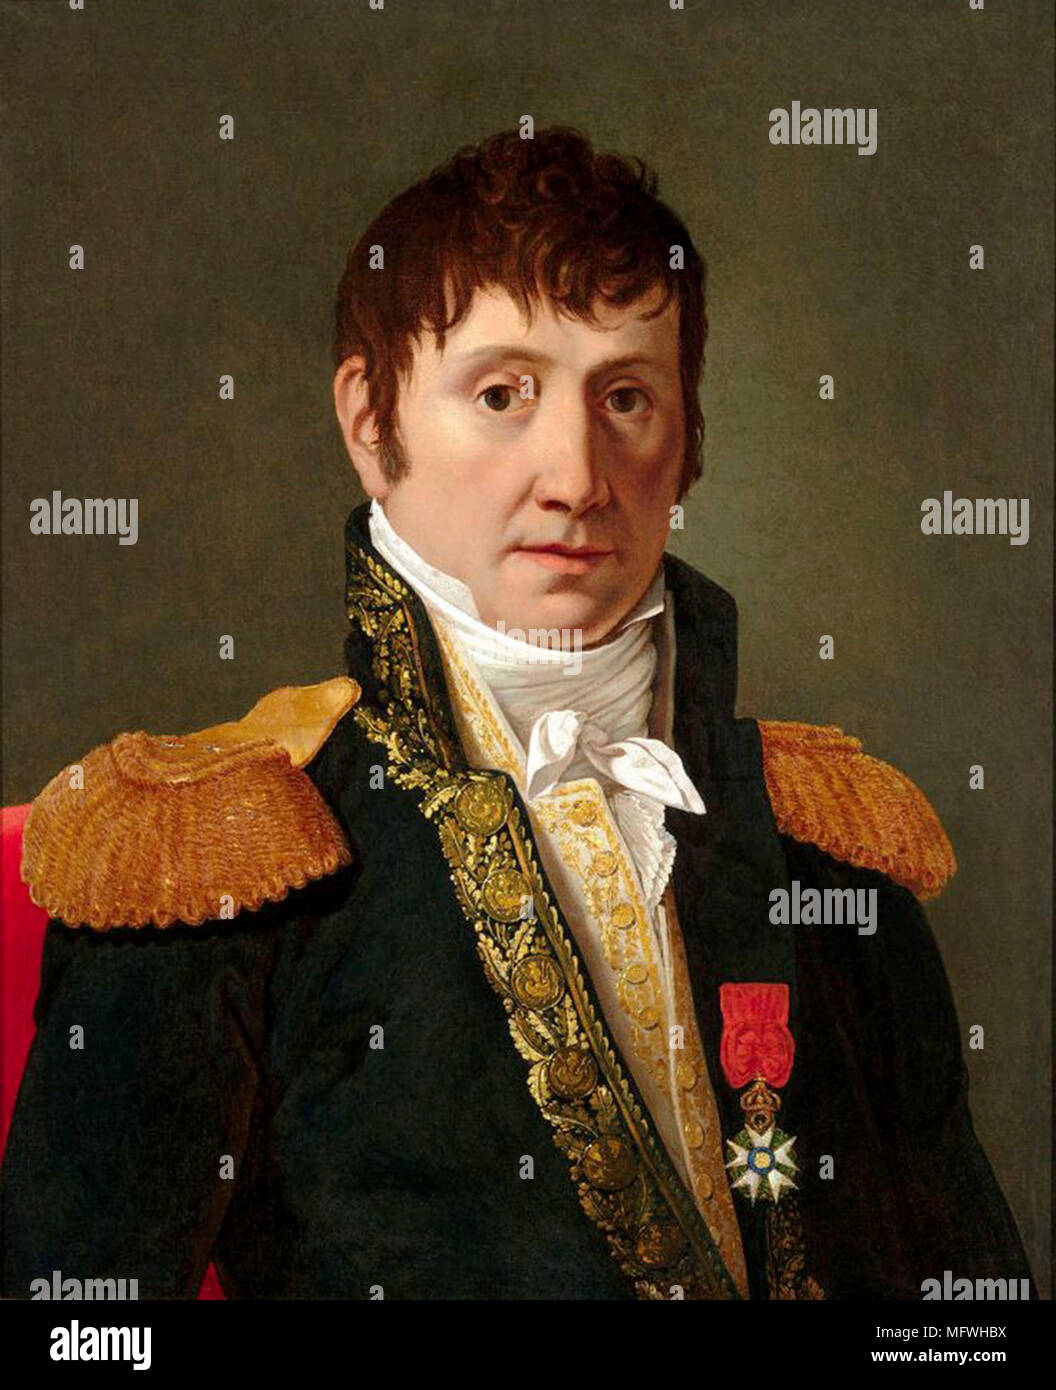 Marshal General Jean-de-Dieu Soult, 1st Duke of Dalmatia, (1769 – 1851)  French general and statesman, named Marshal of the Empire in 1804 and often  called Marshal Soult. The Duke also served three